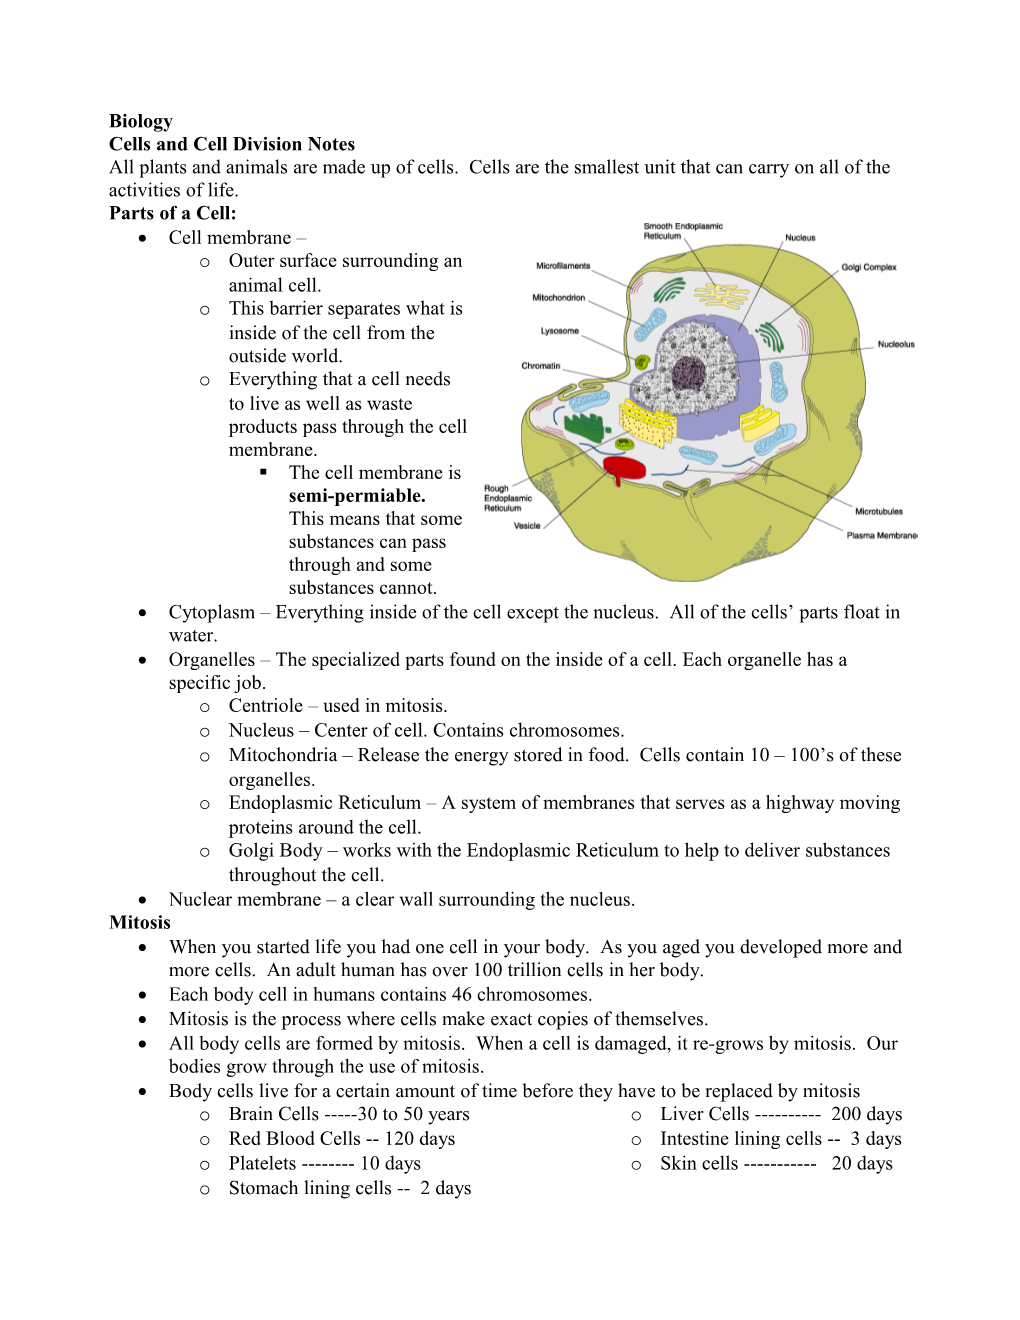 Cells and Cell Division Notes